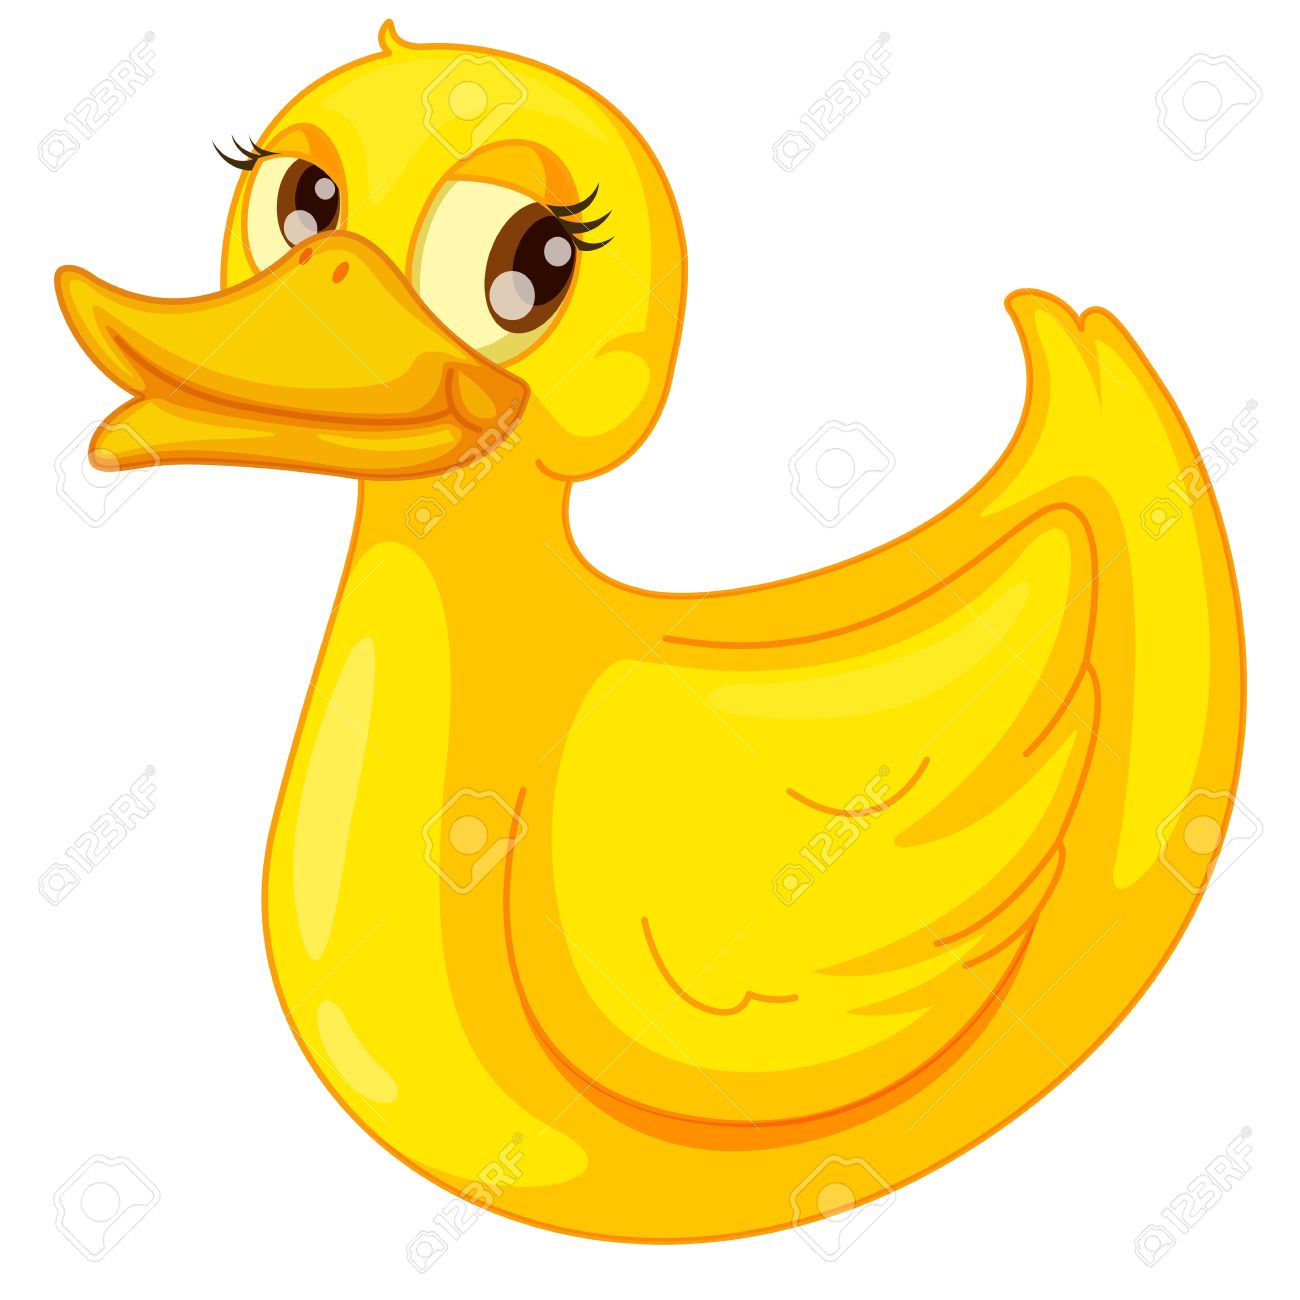 1 clipart duck. Yellow mother 